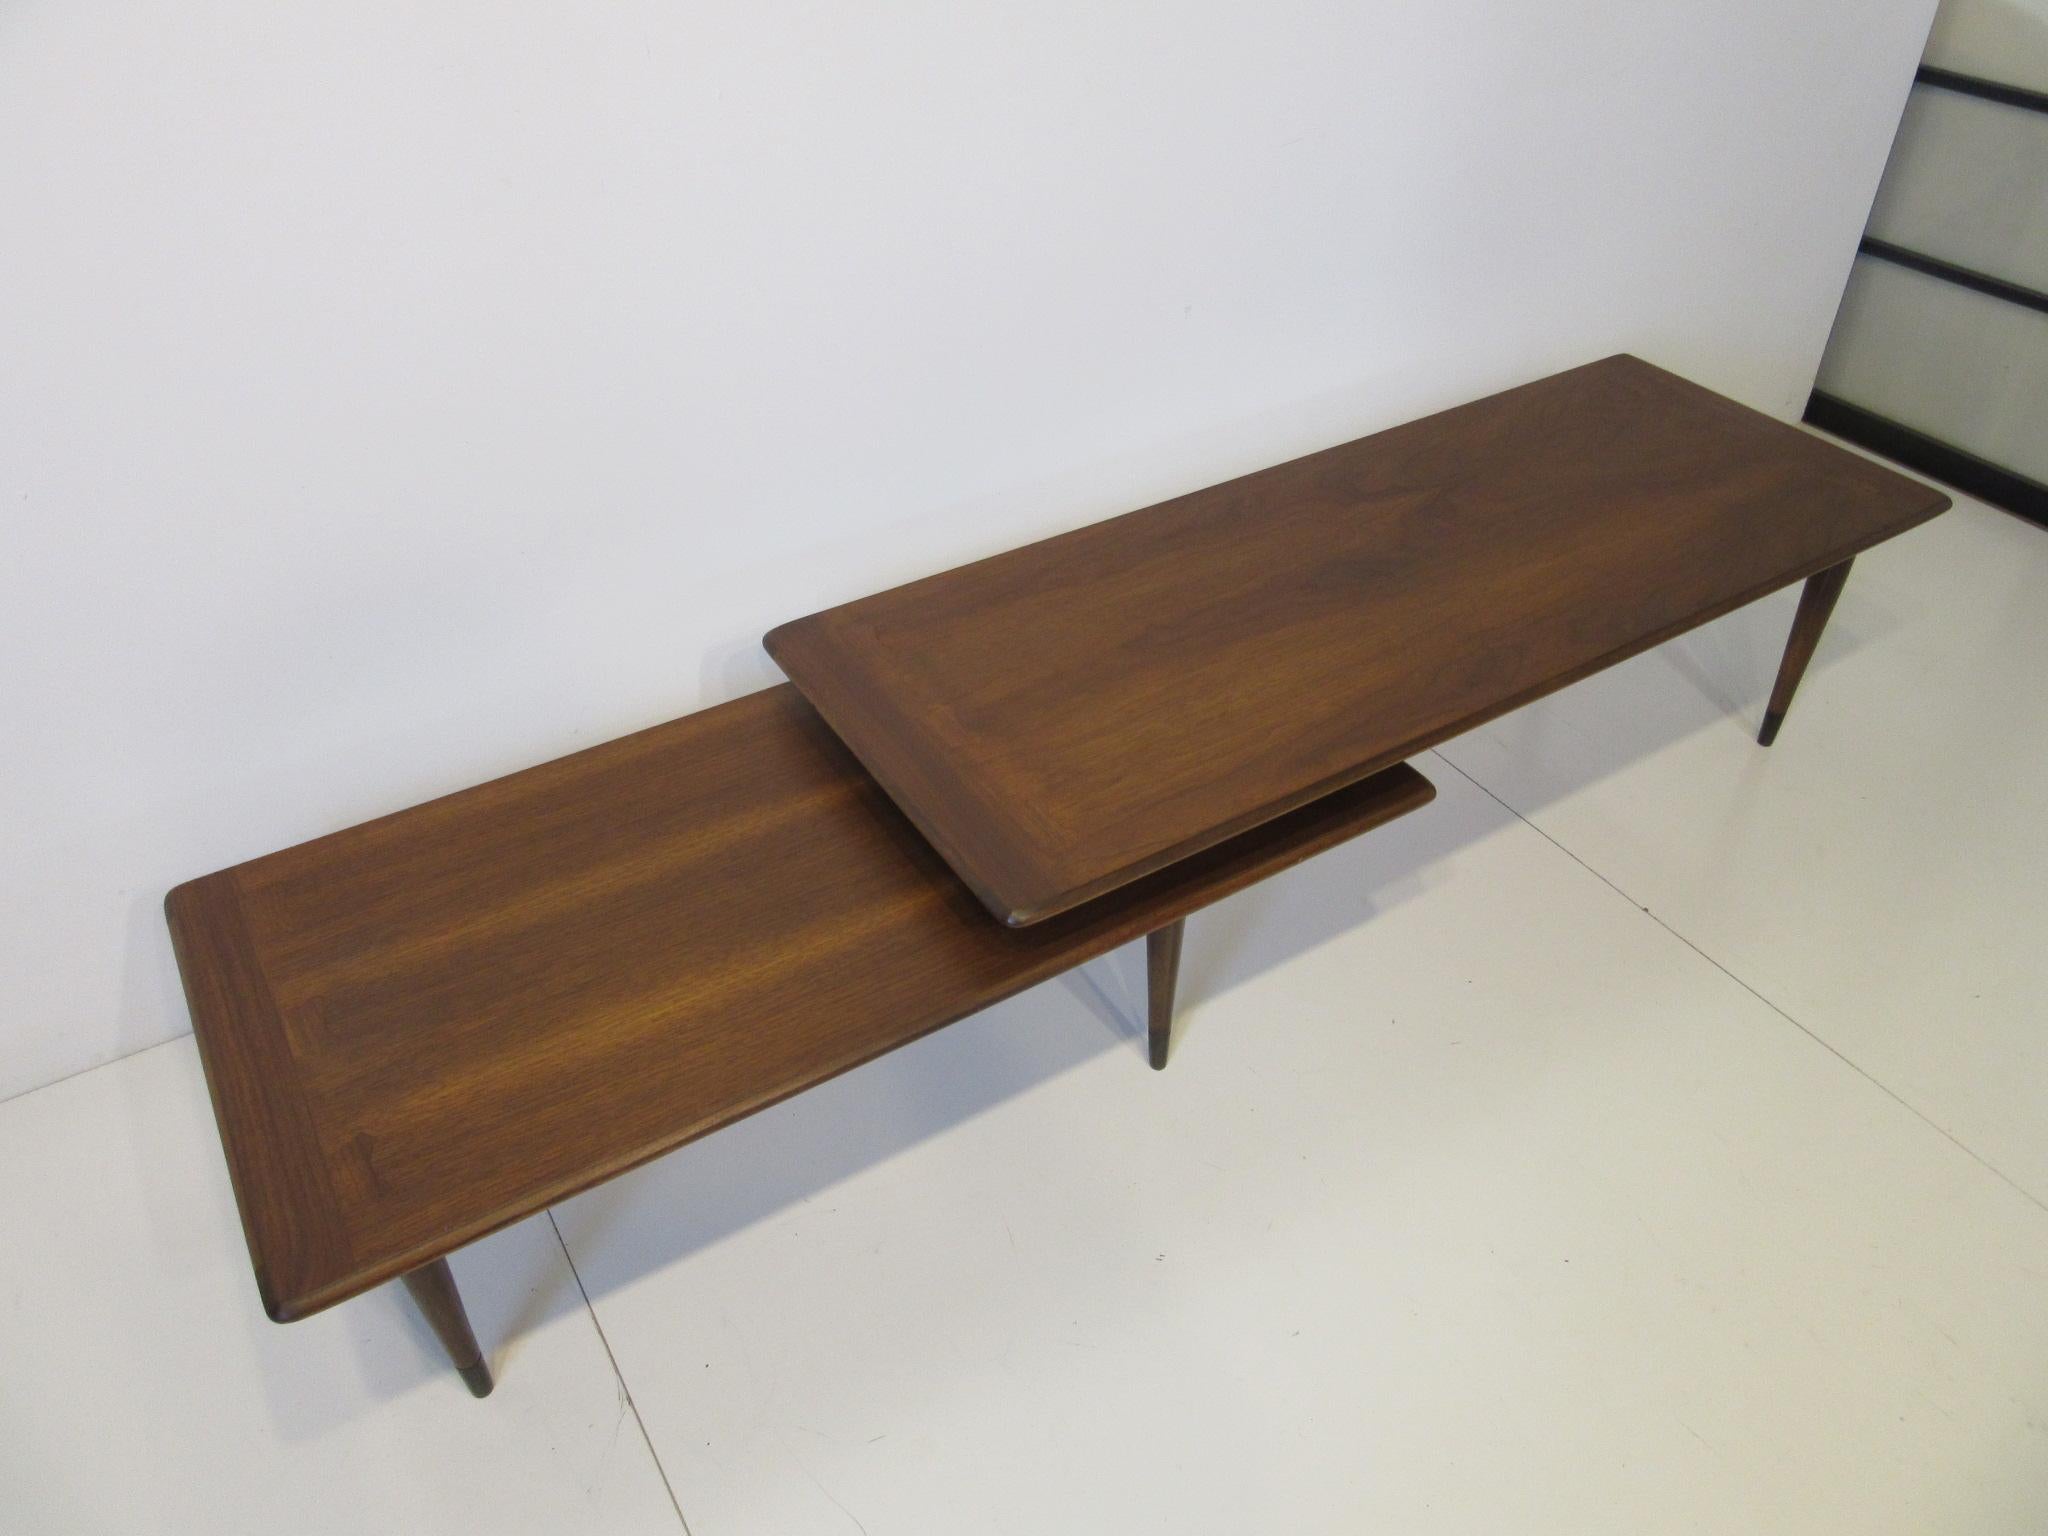 A dark walnut toned switchblade coffee table with pivoting top able to make a L angle, longer size or can be tucked into each other for a shorter length. One of the best designs for versatile living with detail dovetails to the top edges